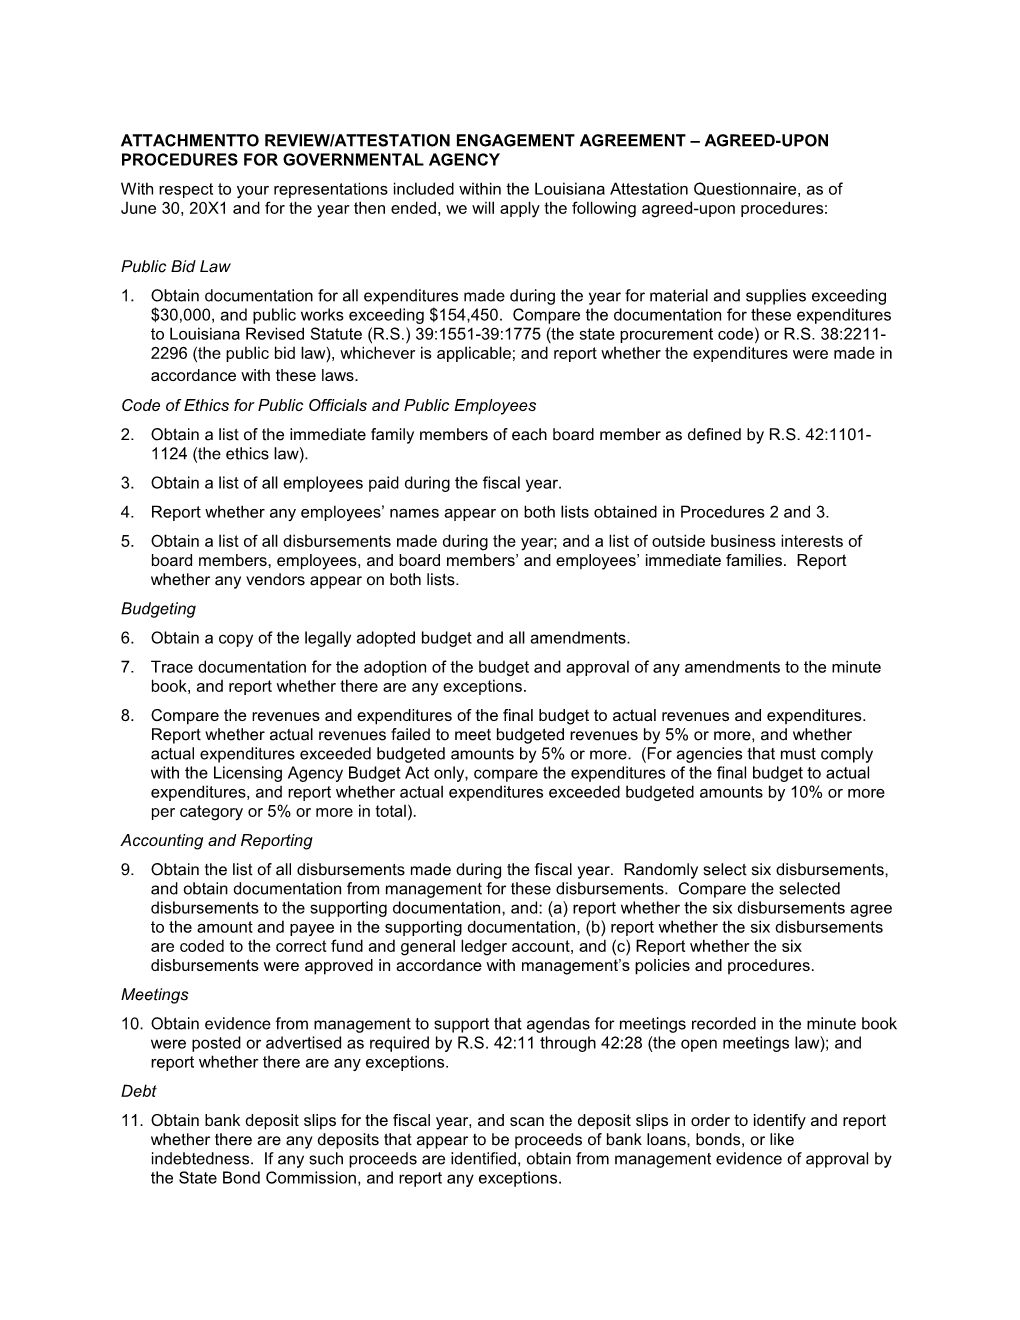 Attachmentto Review/Attestation Engagement Agreement Agreed-Upon Procedures for Governmental